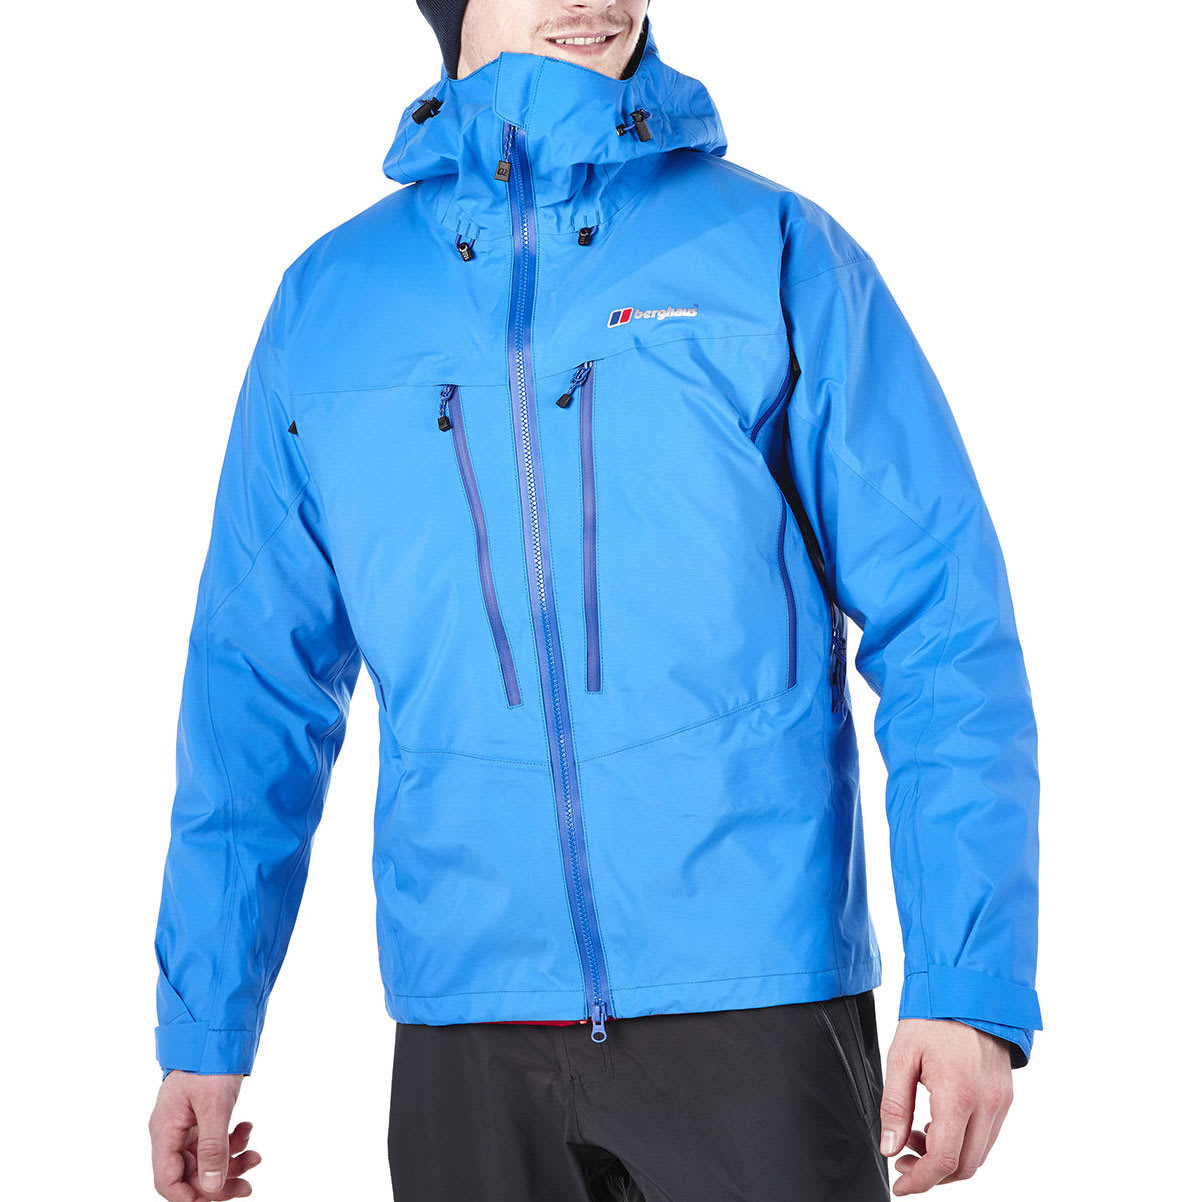 platform Tectonic aflange Buy Berghaus Men's Antelao Gore-Tex Pro Jacket from Outnorth